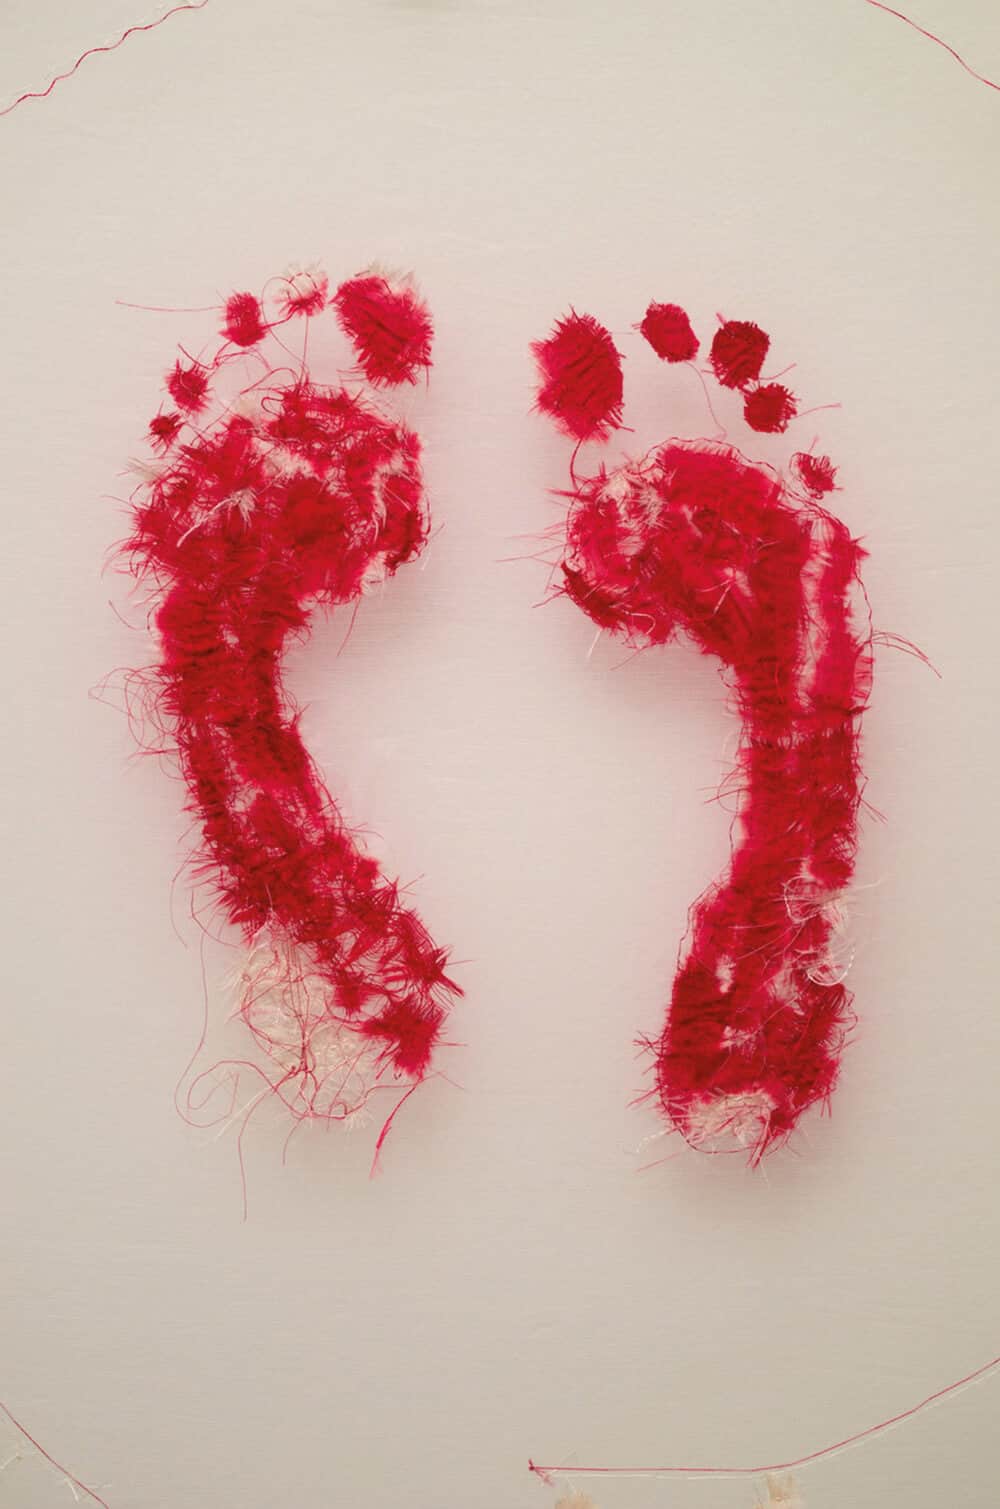 Amita Makan, My Feet, 2012. Hand embroidered with silk, viscose thread, vintage sari on silk organza. (The work is encased in perspex to be viewed recto and verso), 125 x 82 x 3.3cm. Courtesy of the artist.